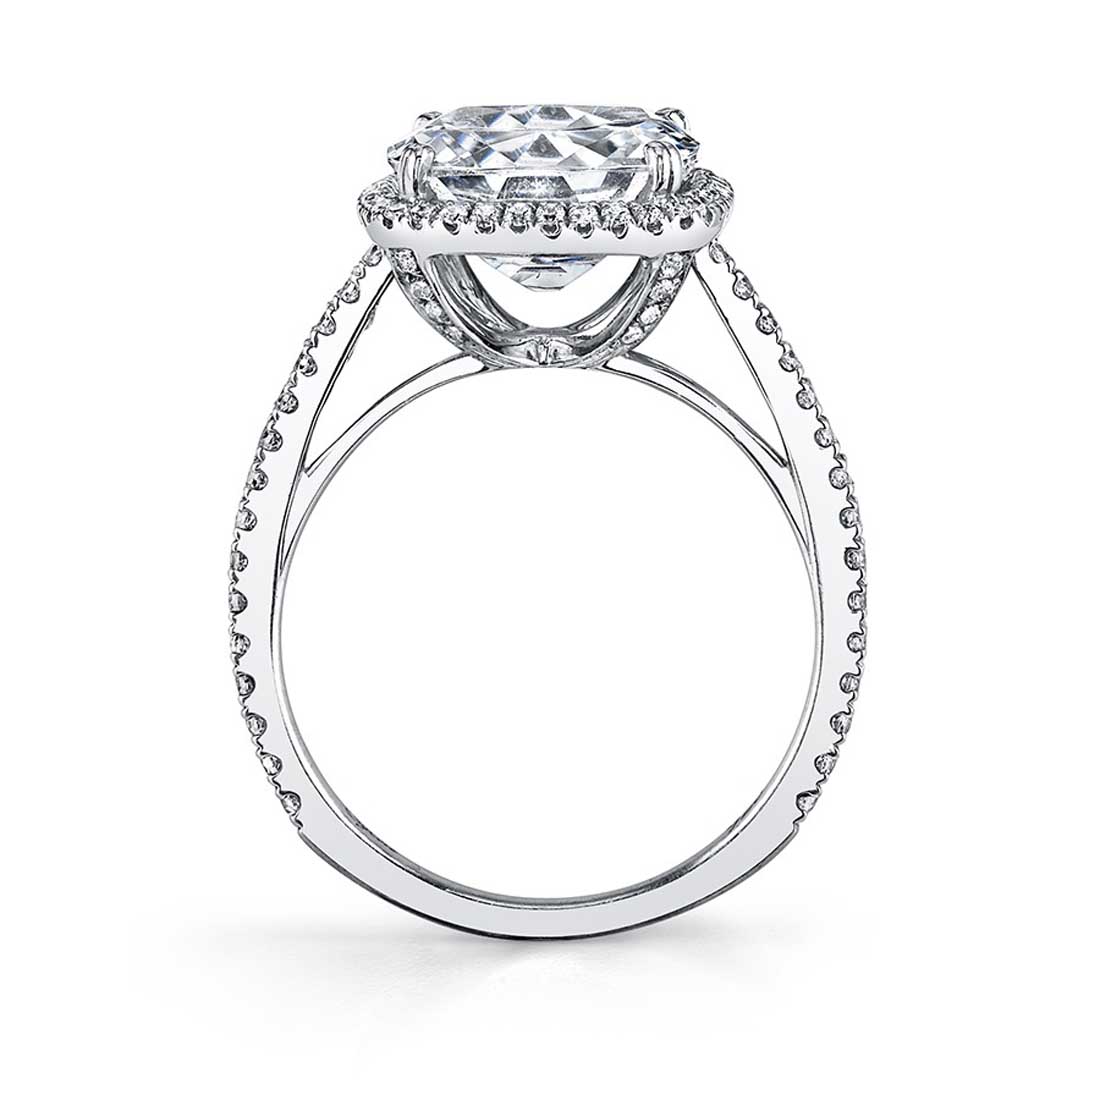 Profile of Cushion Cut Engagement Ring with Halo